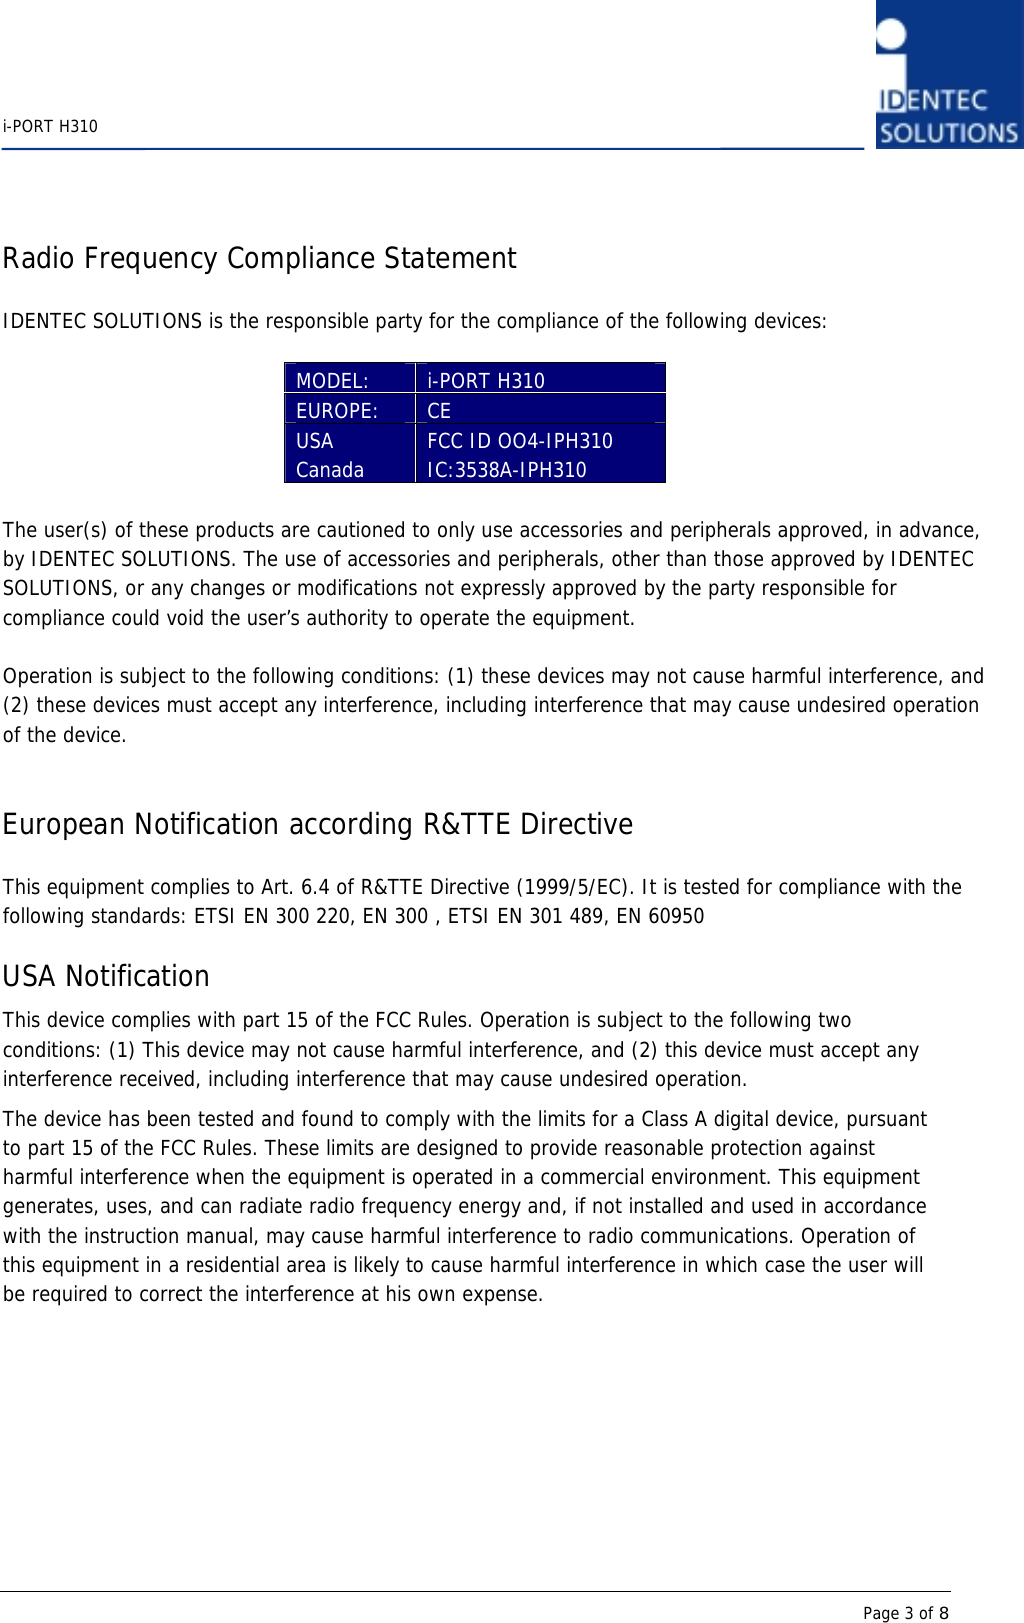    i-PORT H310      Page 3 of 8 Radio Frequency Compliance Statement  IDENTEC SOLUTIONS is the responsible party for the compliance of the following devices:  MODEL:  i-PORT H310 EUROPE:  CE  USA Canada  FCC ID OO4-IPH310 IC:3538A-IPH310  The user(s) of these products are cautioned to only use accessories and peripherals approved, in advance, by IDENTEC SOLUTIONS. The use of accessories and peripherals, other than those approved by IDENTEC SOLUTIONS, or any changes or modifications not expressly approved by the party responsible for compliance could void the user’s authority to operate the equipment.  Operation is subject to the following conditions: (1) these devices may not cause harmful interference, and (2) these devices must accept any interference, including interference that may cause undesired operation of the device.   European Notification according R&amp;TTE Directive  This equipment complies to Art. 6.4 of R&amp;TTE Directive (1999/5/EC). It is tested for compliance with the following standards: ETSI EN 300 220, EN 300 , ETSI EN 301 489, EN 60950  USA Notification This device complies with part 15 of the FCC Rules. Operation is subject to the following two conditions: (1) This device may not cause harmful interference, and (2) this device must accept any interference received, including interference that may cause undesired operation. The device has been tested and found to comply with the limits for a Class A digital device, pursuant to part 15 of the FCC Rules. These limits are designed to provide reasonable protection against harmful interference when the equipment is operated in a commercial environment. This equipment generates, uses, and can radiate radio frequency energy and, if not installed and used in accordance with the instruction manual, may cause harmful interference to radio communications. Operation of this equipment in a residential area is likely to cause harmful interference in which case the user will be required to correct the interference at his own expense.  